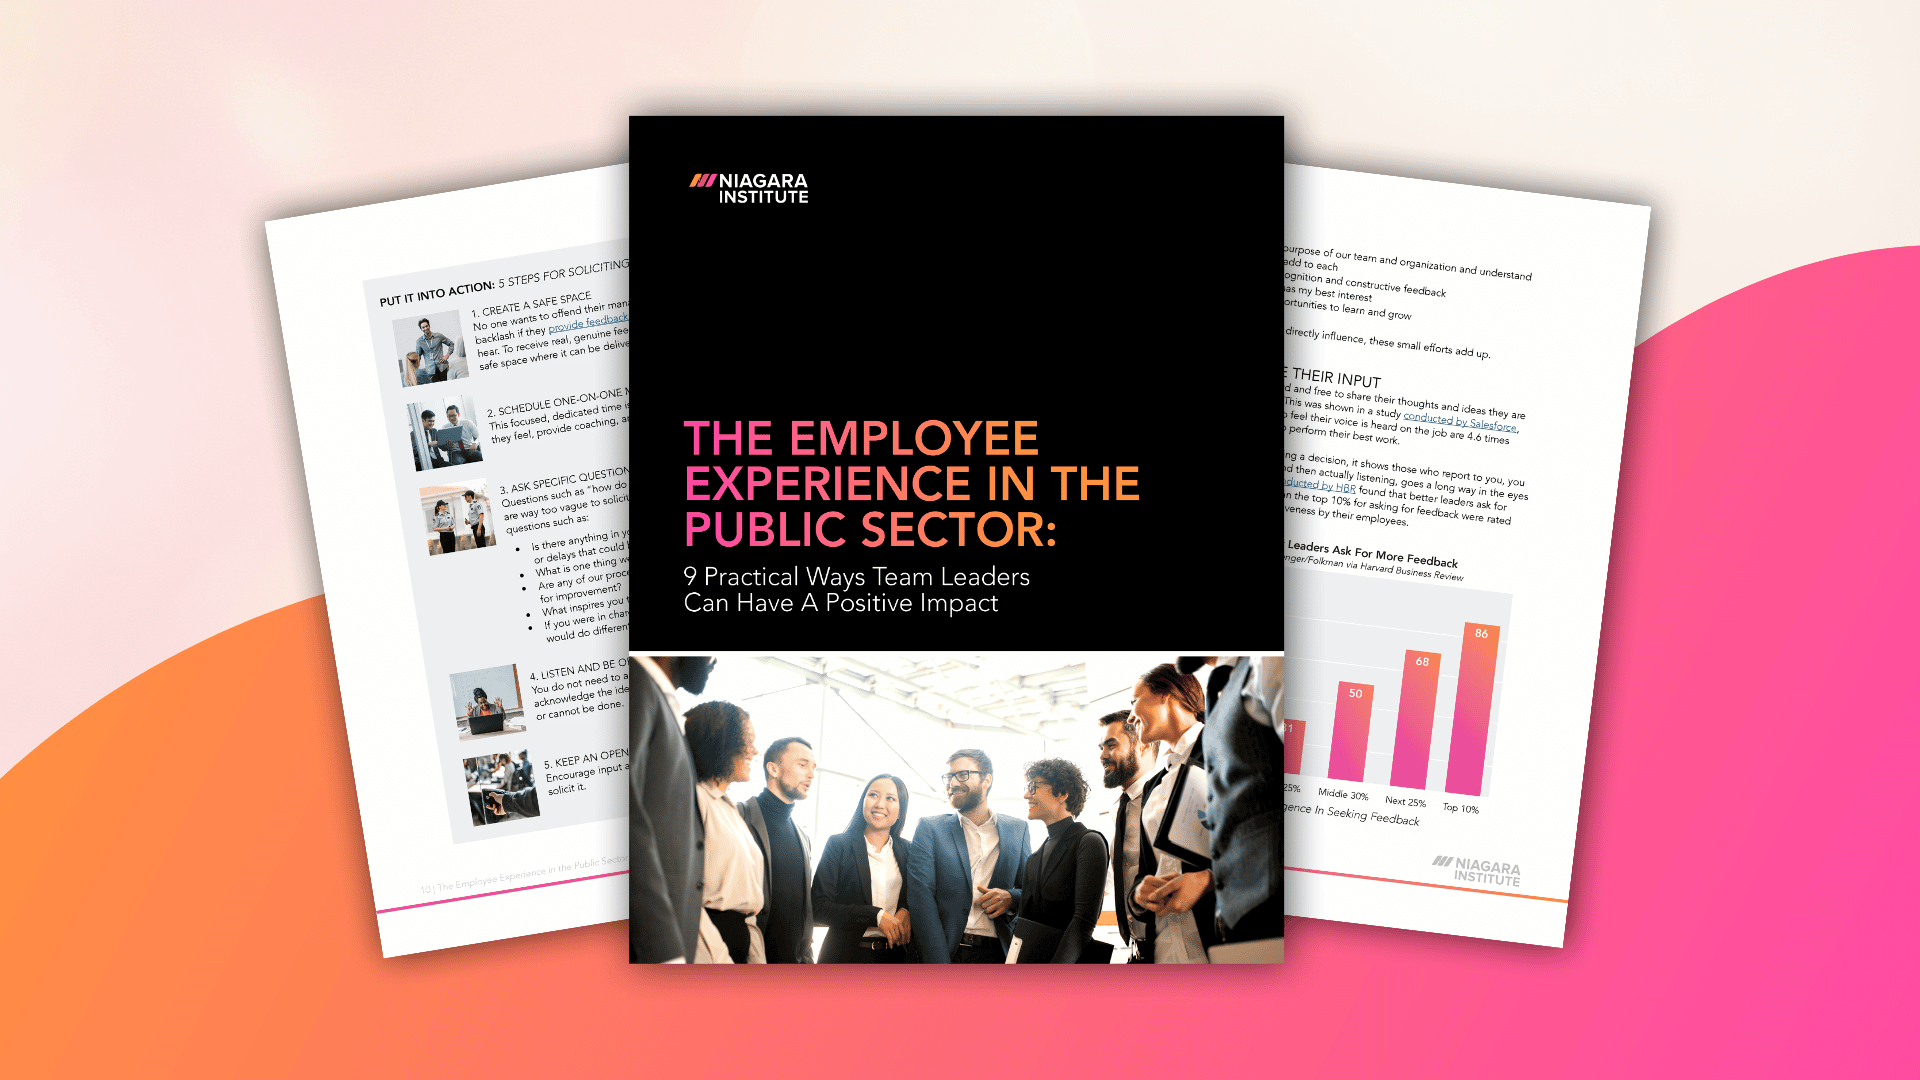 [GUIDE] The Employee Experience In The Public Sector